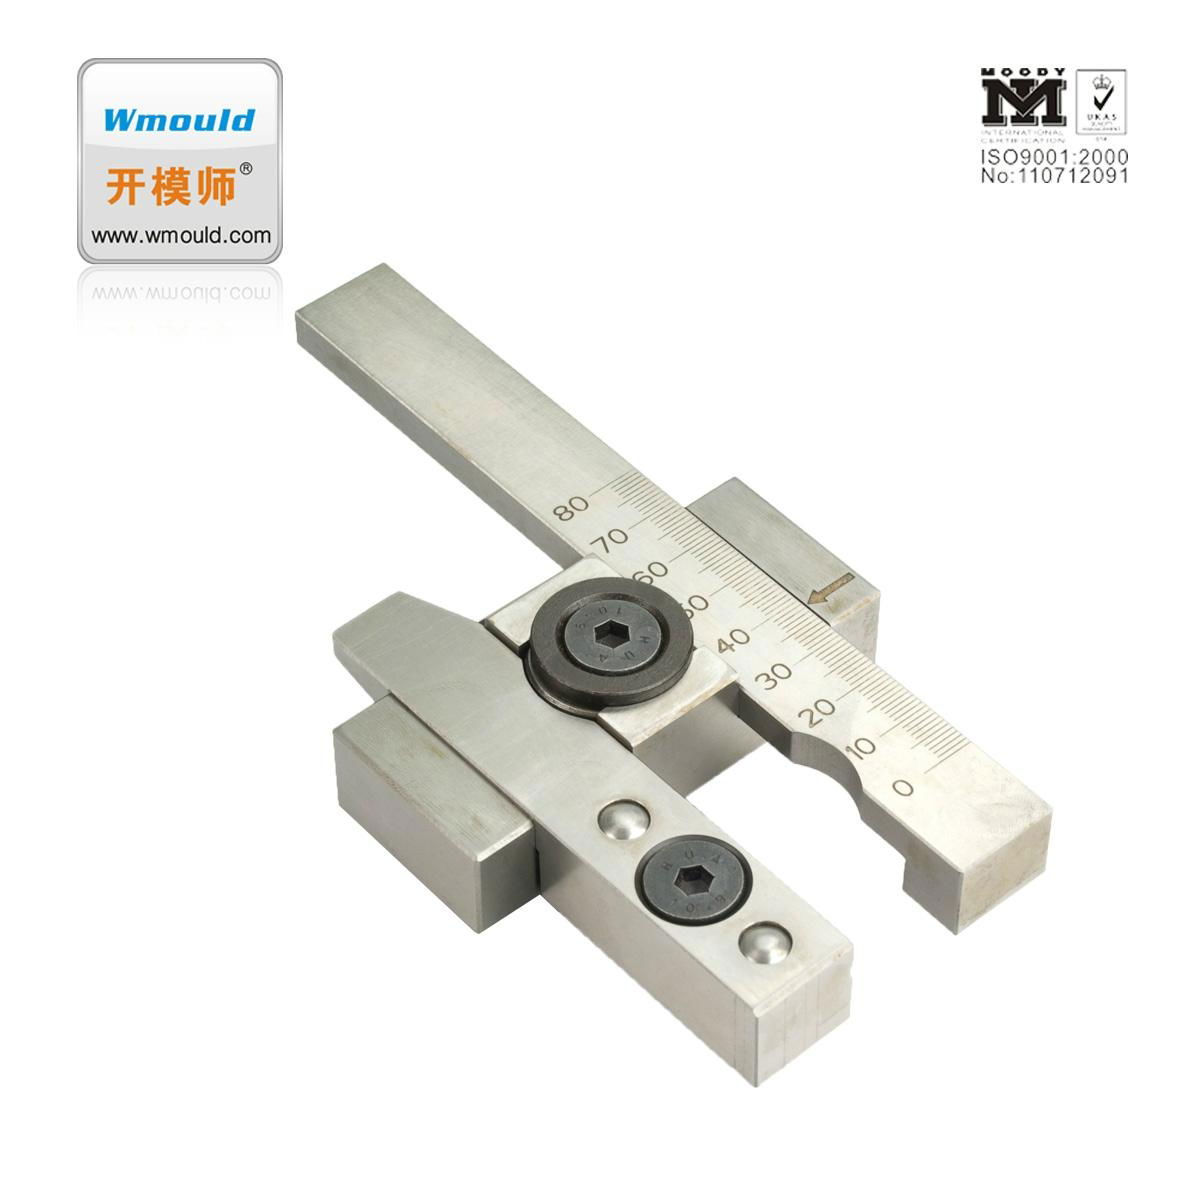 Mold latch lock with plastic injection mould component 5